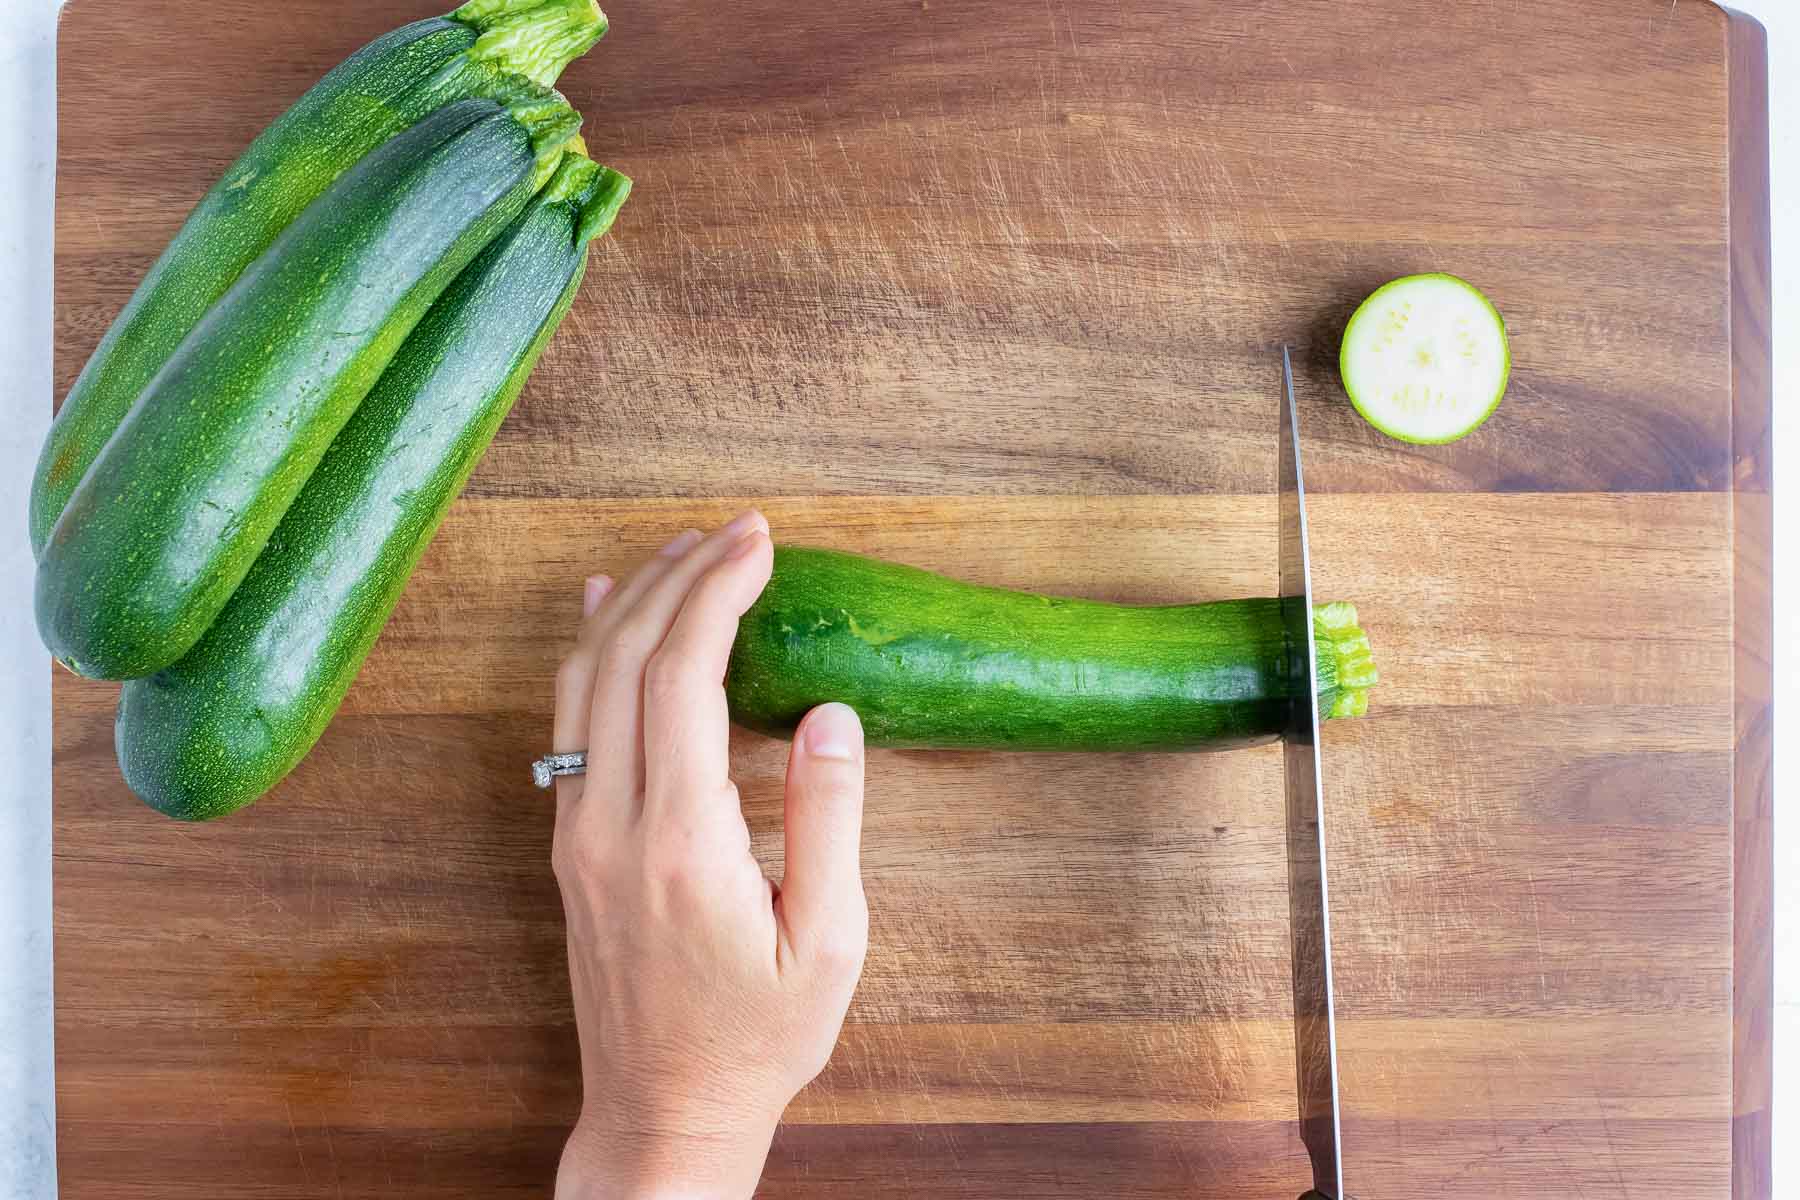 The ends of a zucchini are sliced off.